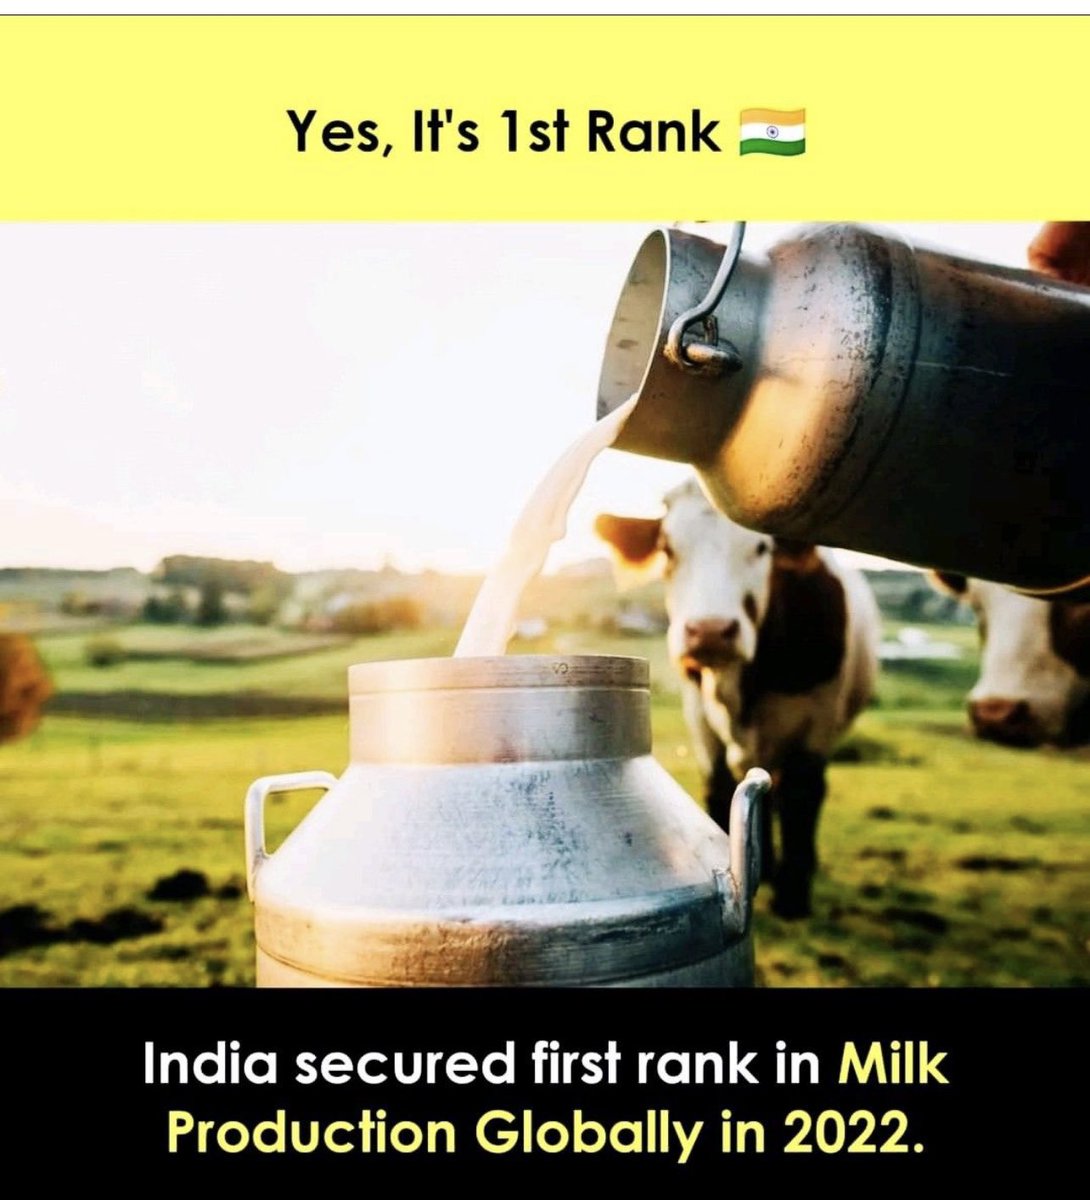 India clinched the top position in milk production for year 2021-22 . The country is now contributing to a quarter of global milk production. #india #globalproduction #dairyfarm #governmentofindia